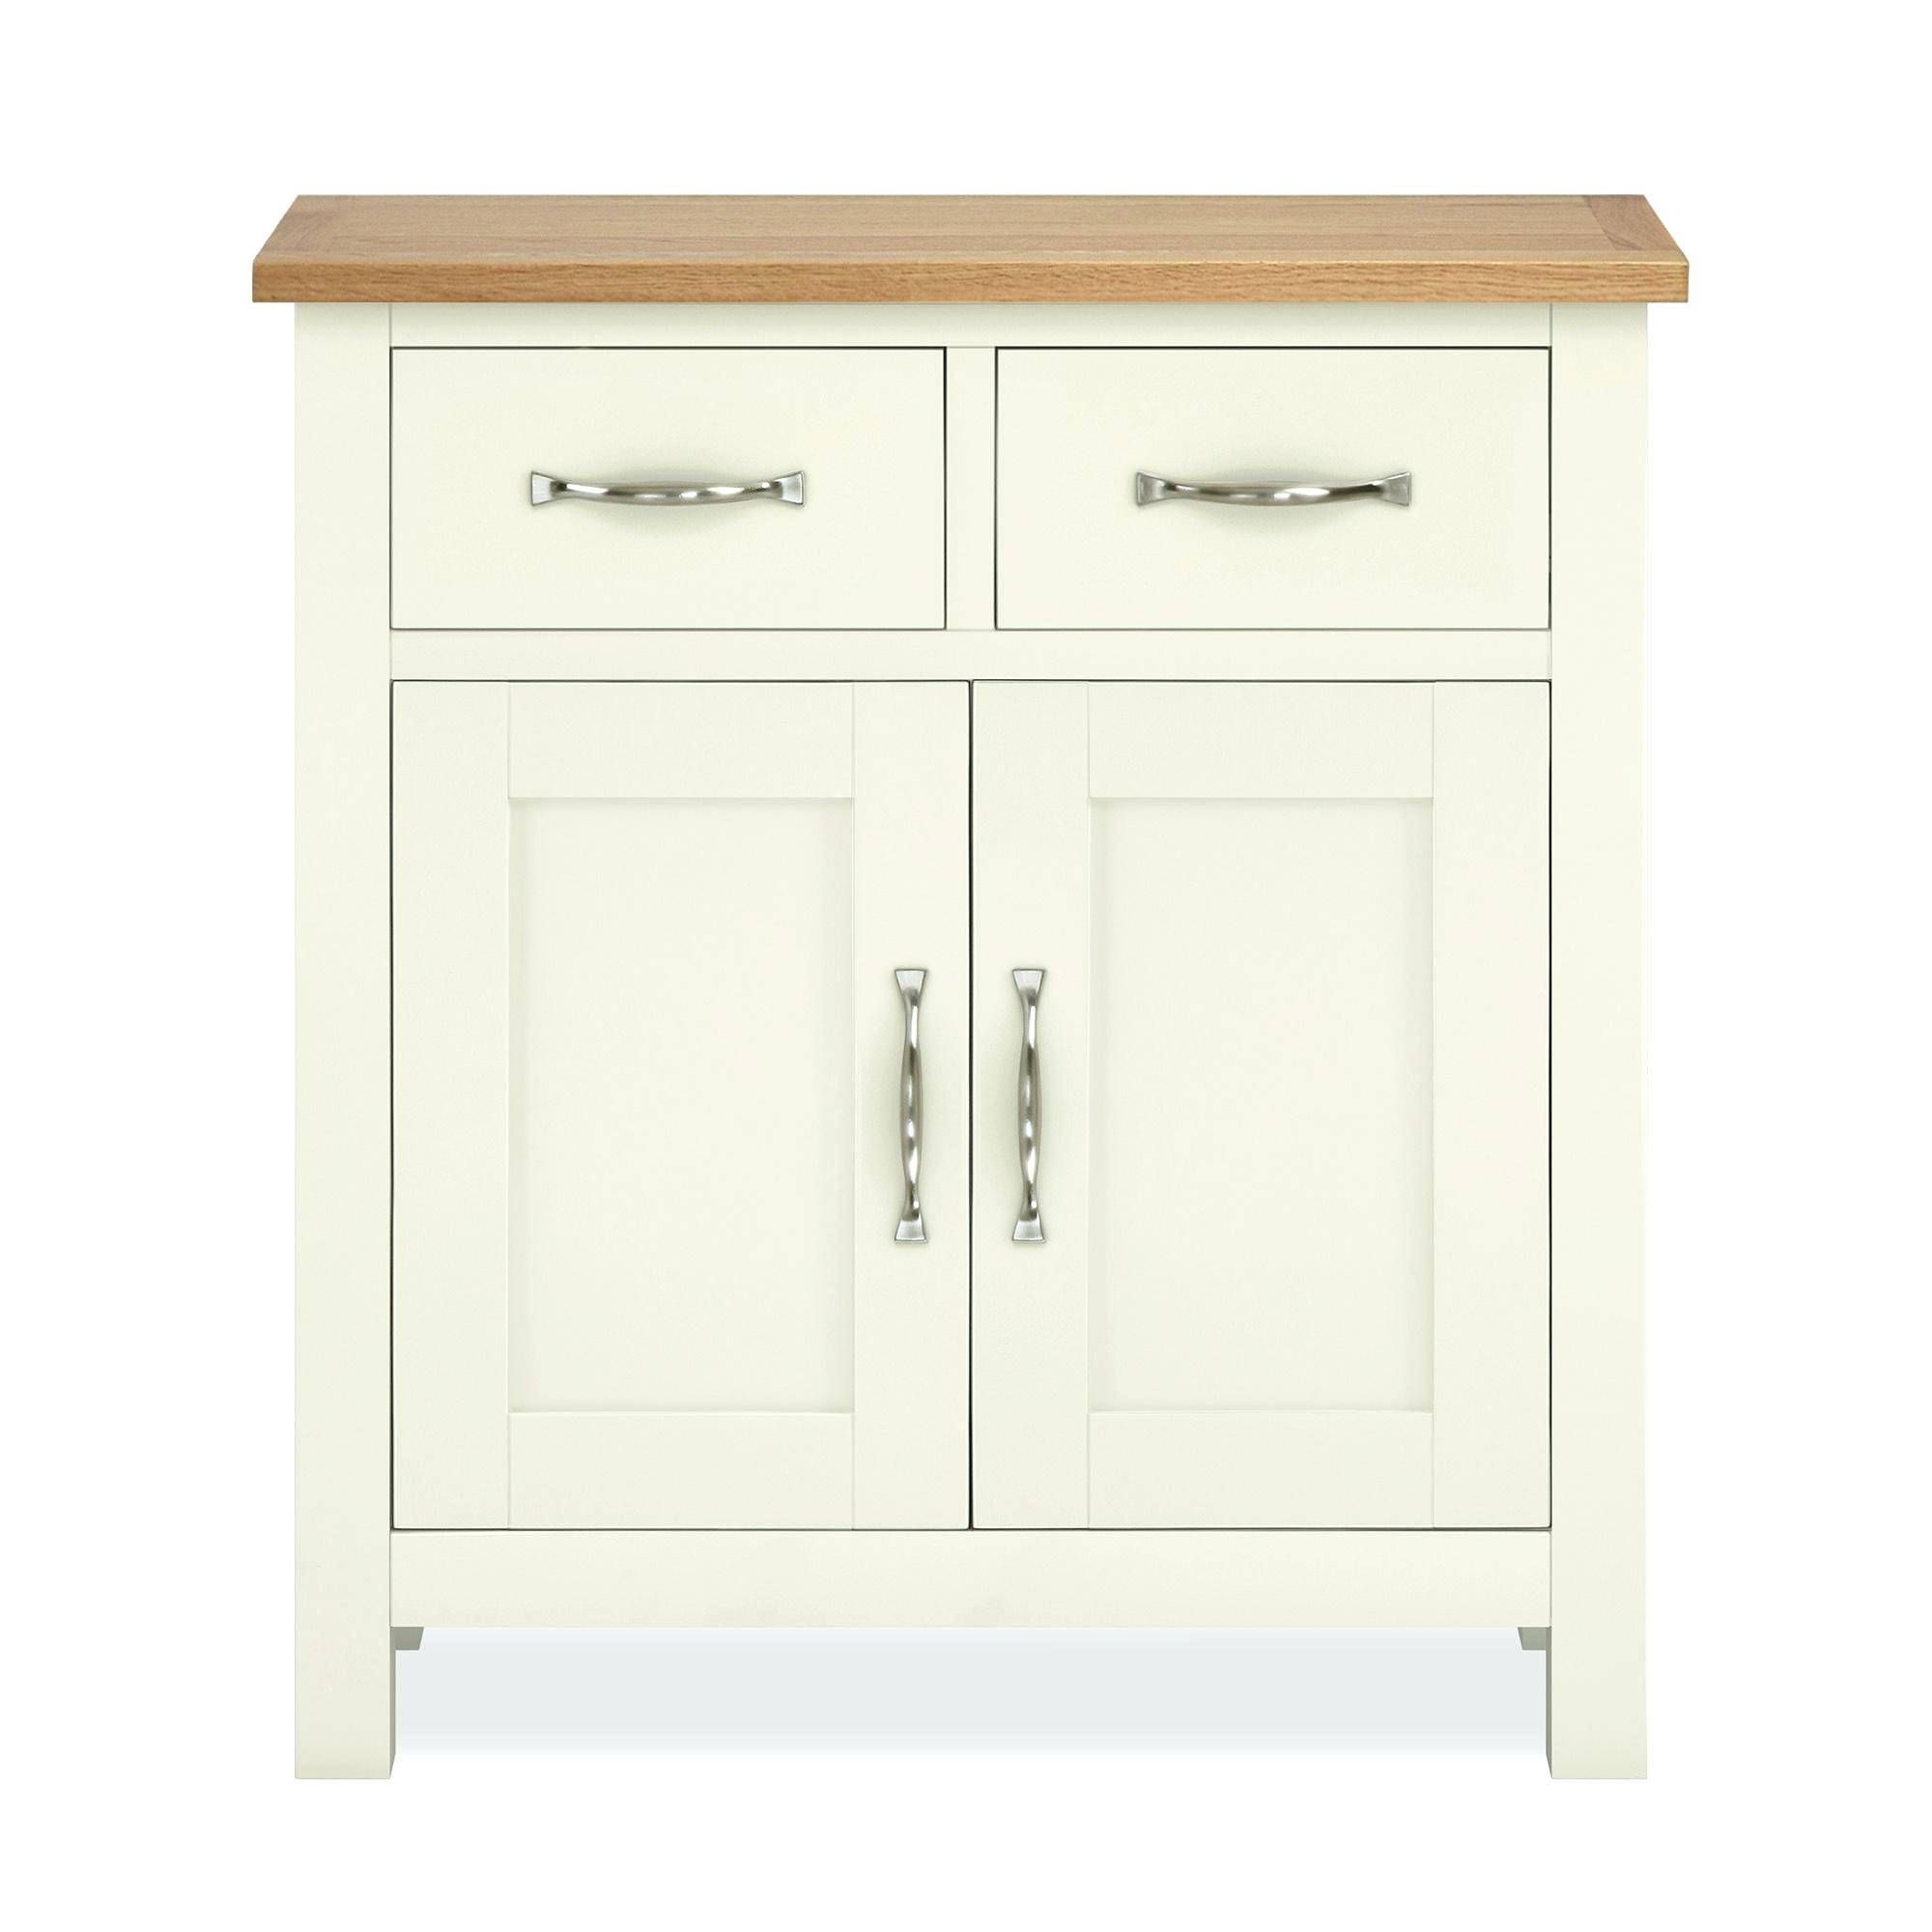 Cream Sideboard Cream Solid Oak Sideboard Large Cream Sideboard Throughout Current Cream And Oak Sideboards (Photo 12 of 15)